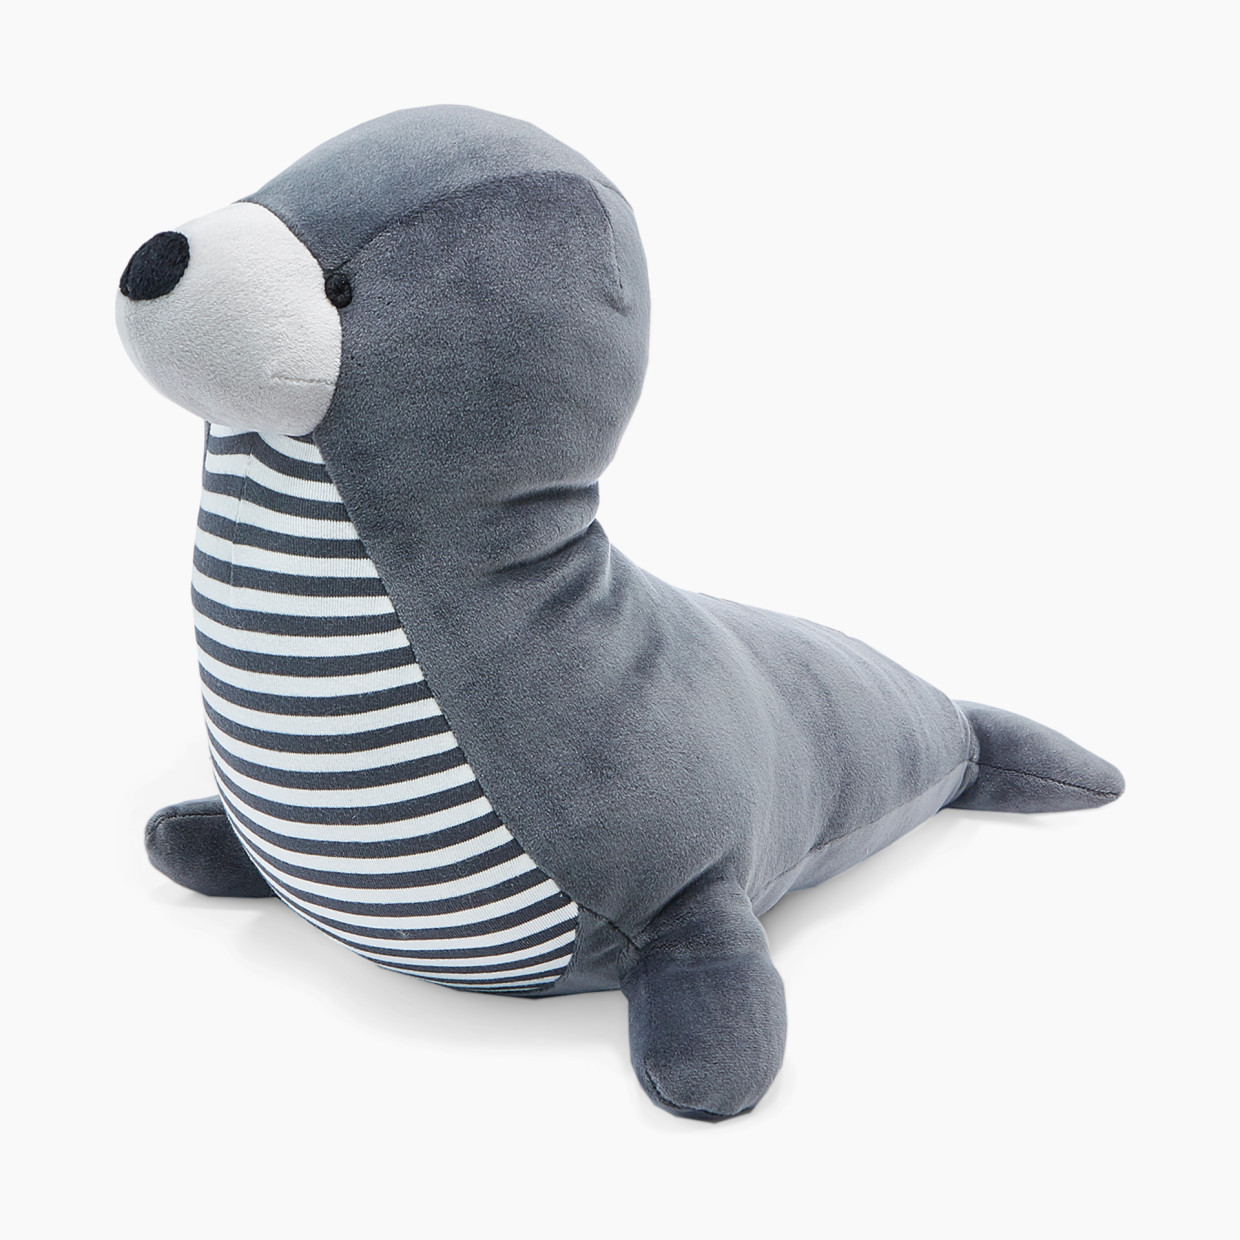 Bunnies By The Bay, Inc. Good Friends By The Bay Stuffed Animal - Seamore Seal.